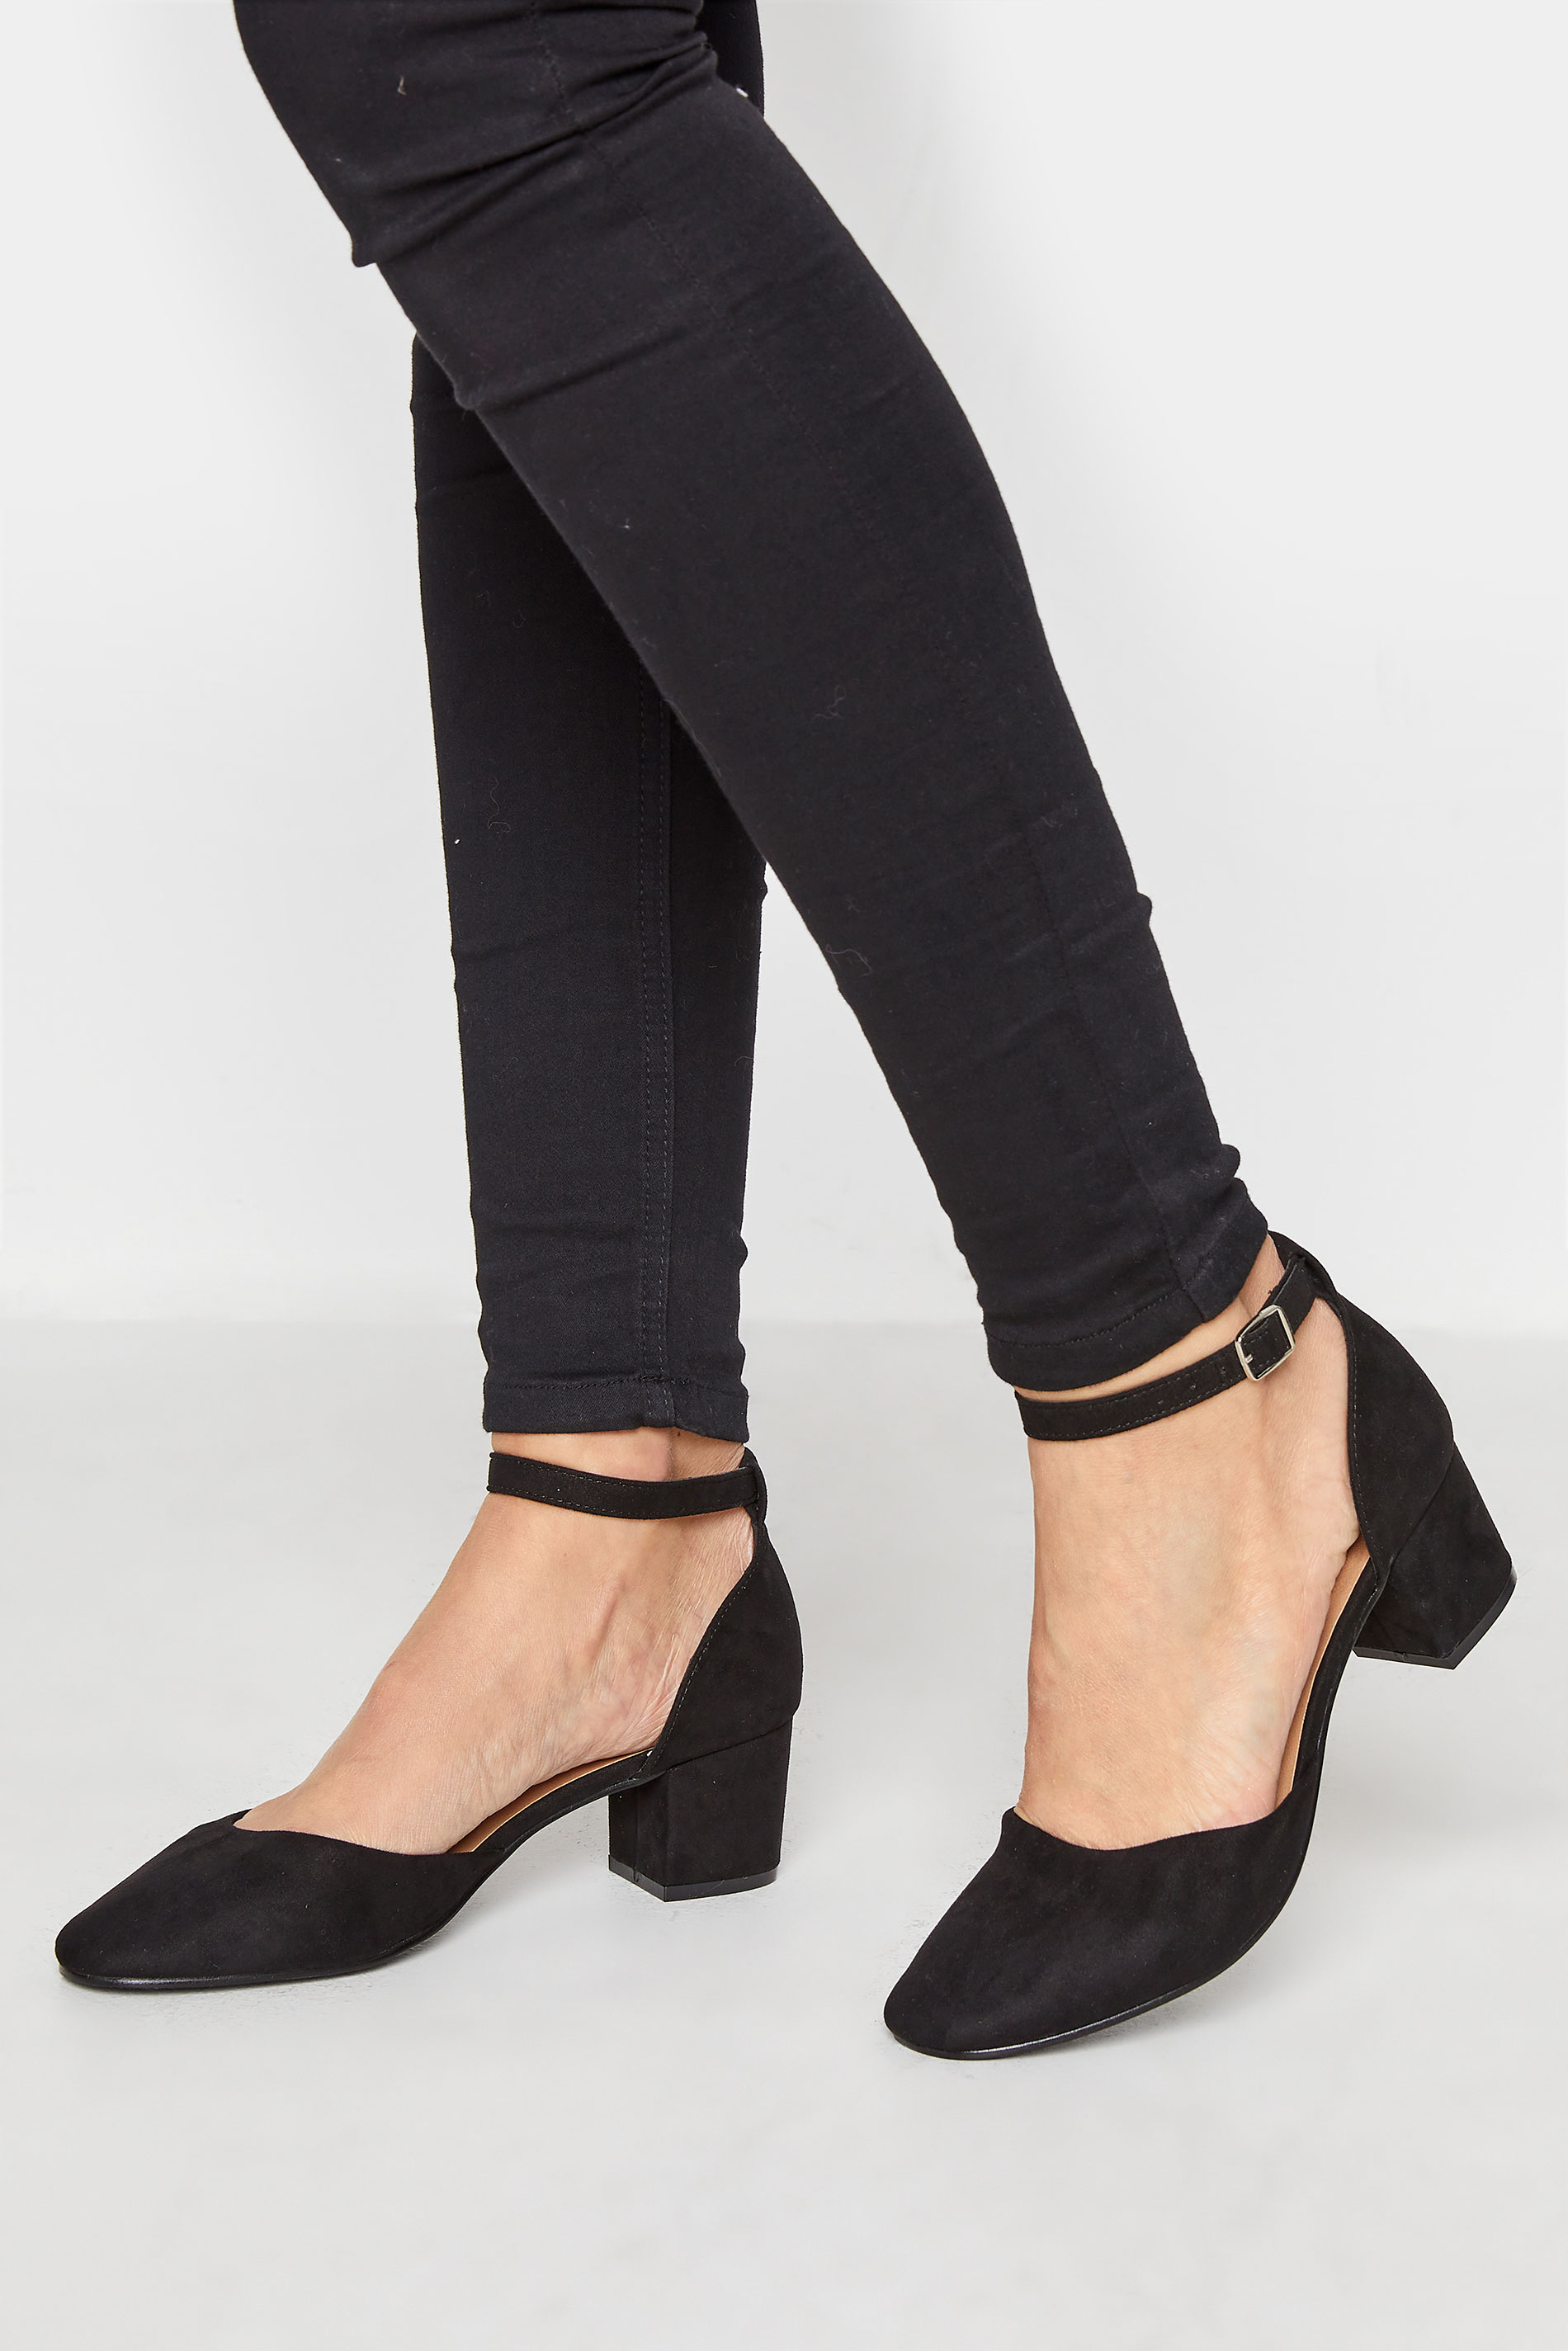 LTS Black Block Heel Court Shoes In Standard D Fit | Long Tall Sally 1